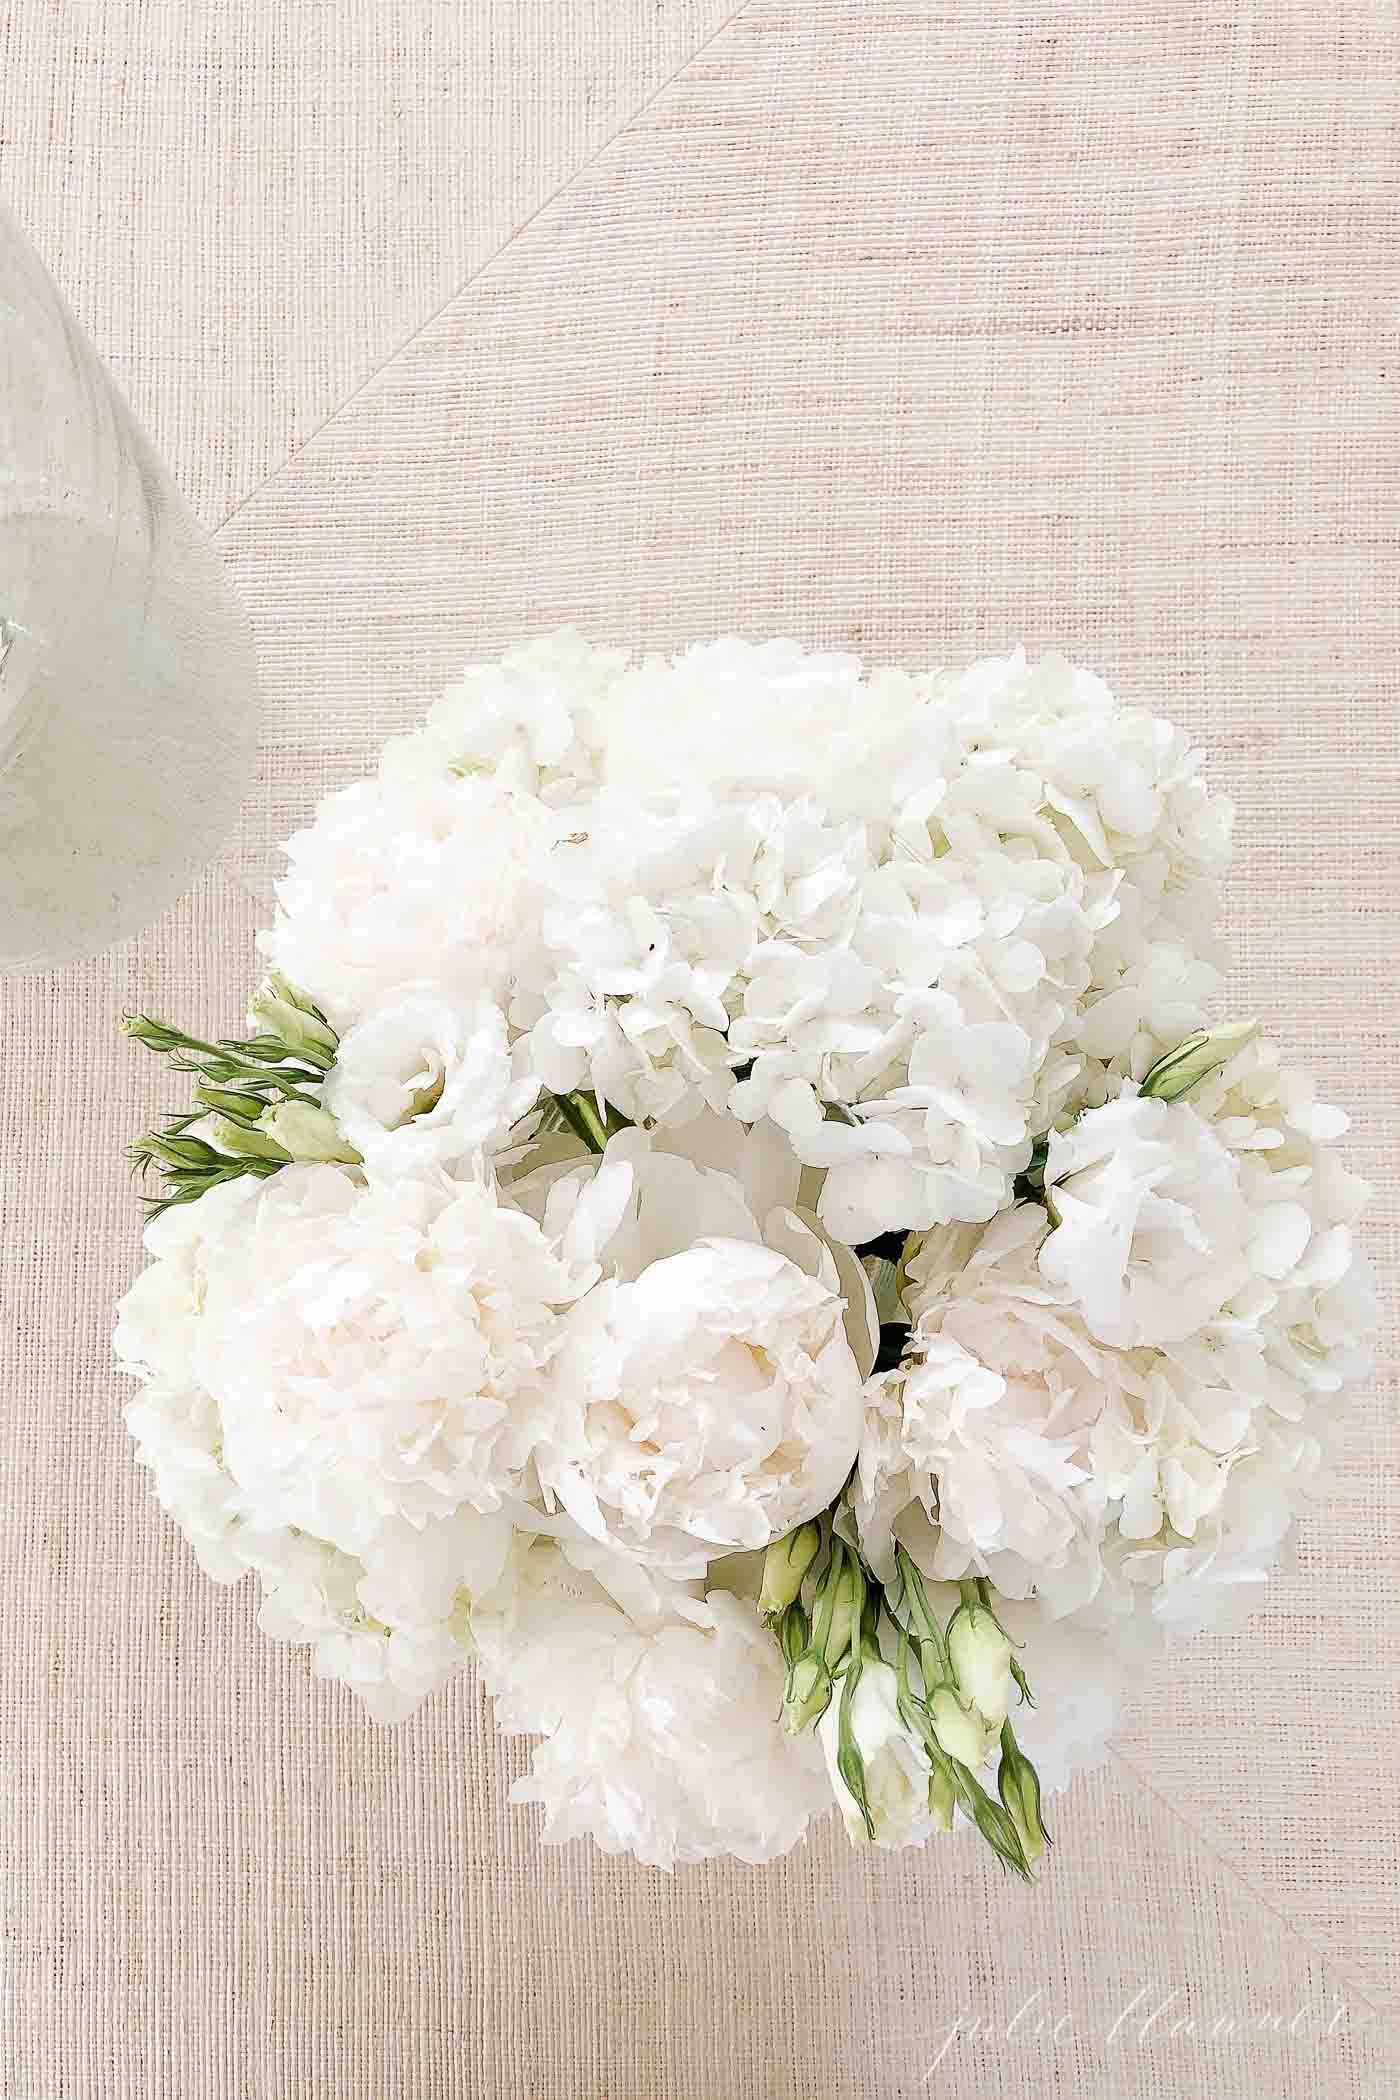 Florist arrangement of white hydrangea and peonies on a neutral rattan coffee table.